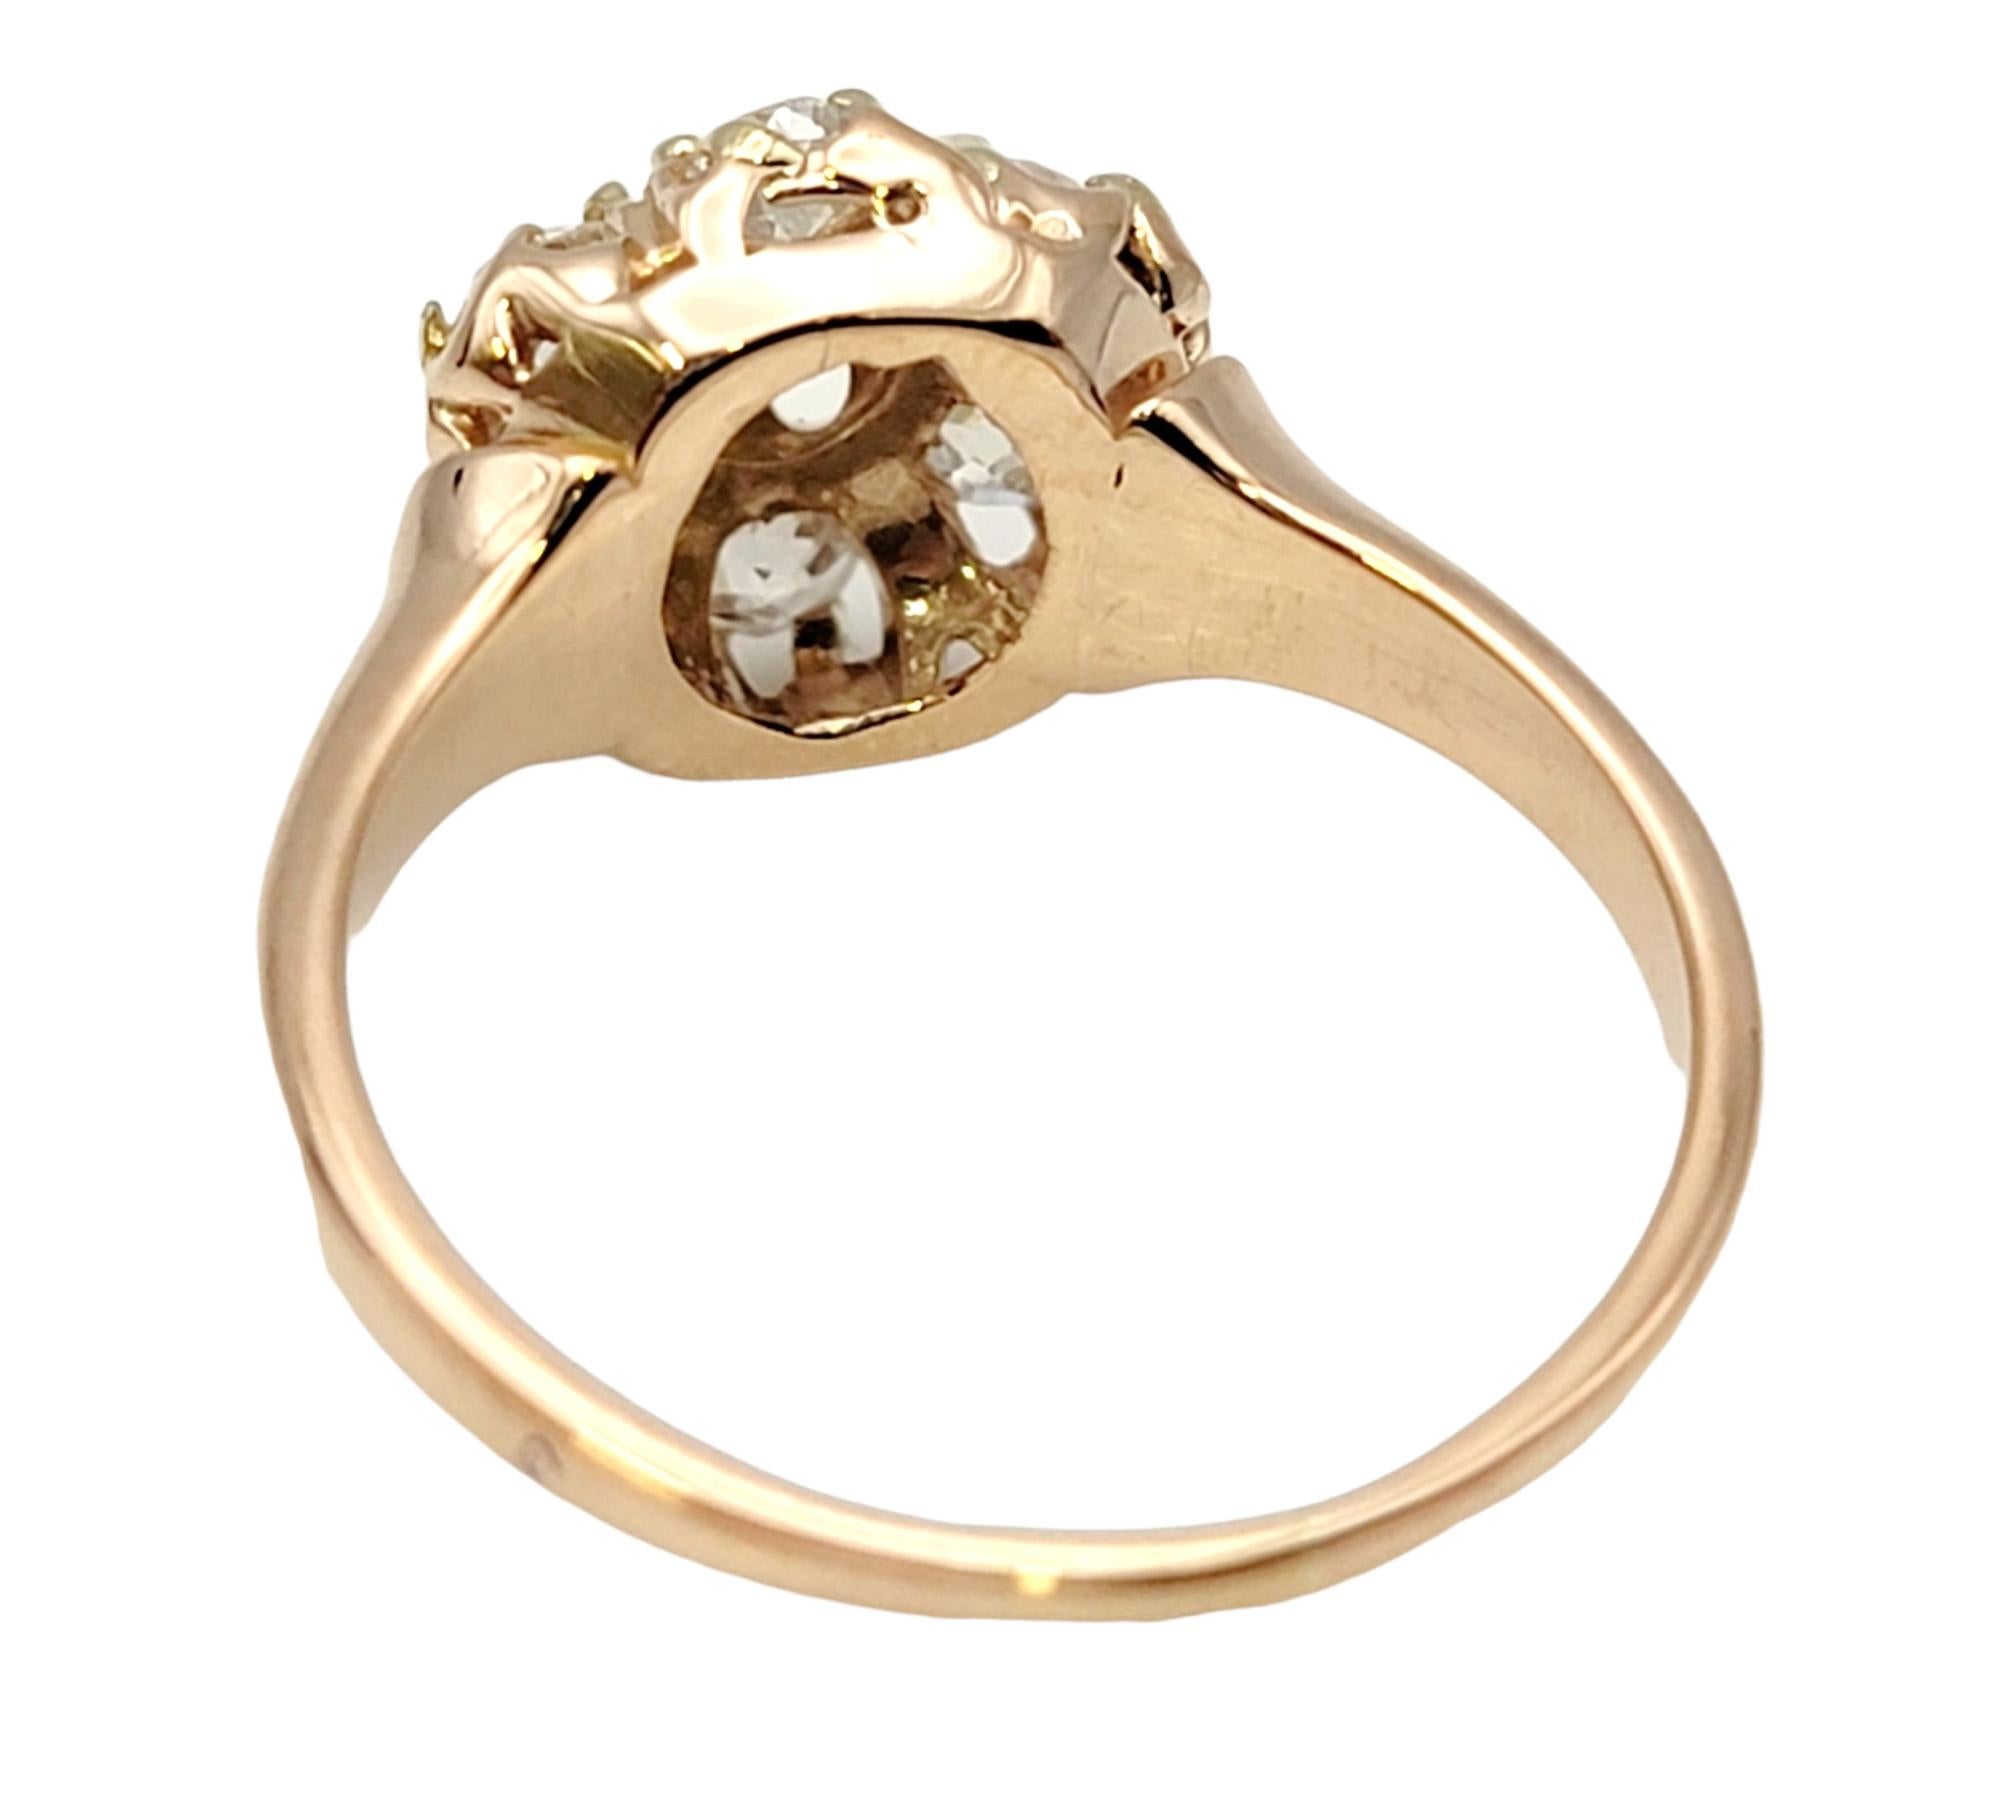 Vintage Old European Cut Diamond Flower Cluster Ring in 14 Karat Yellow Gold In Good Condition For Sale In Scottsdale, AZ